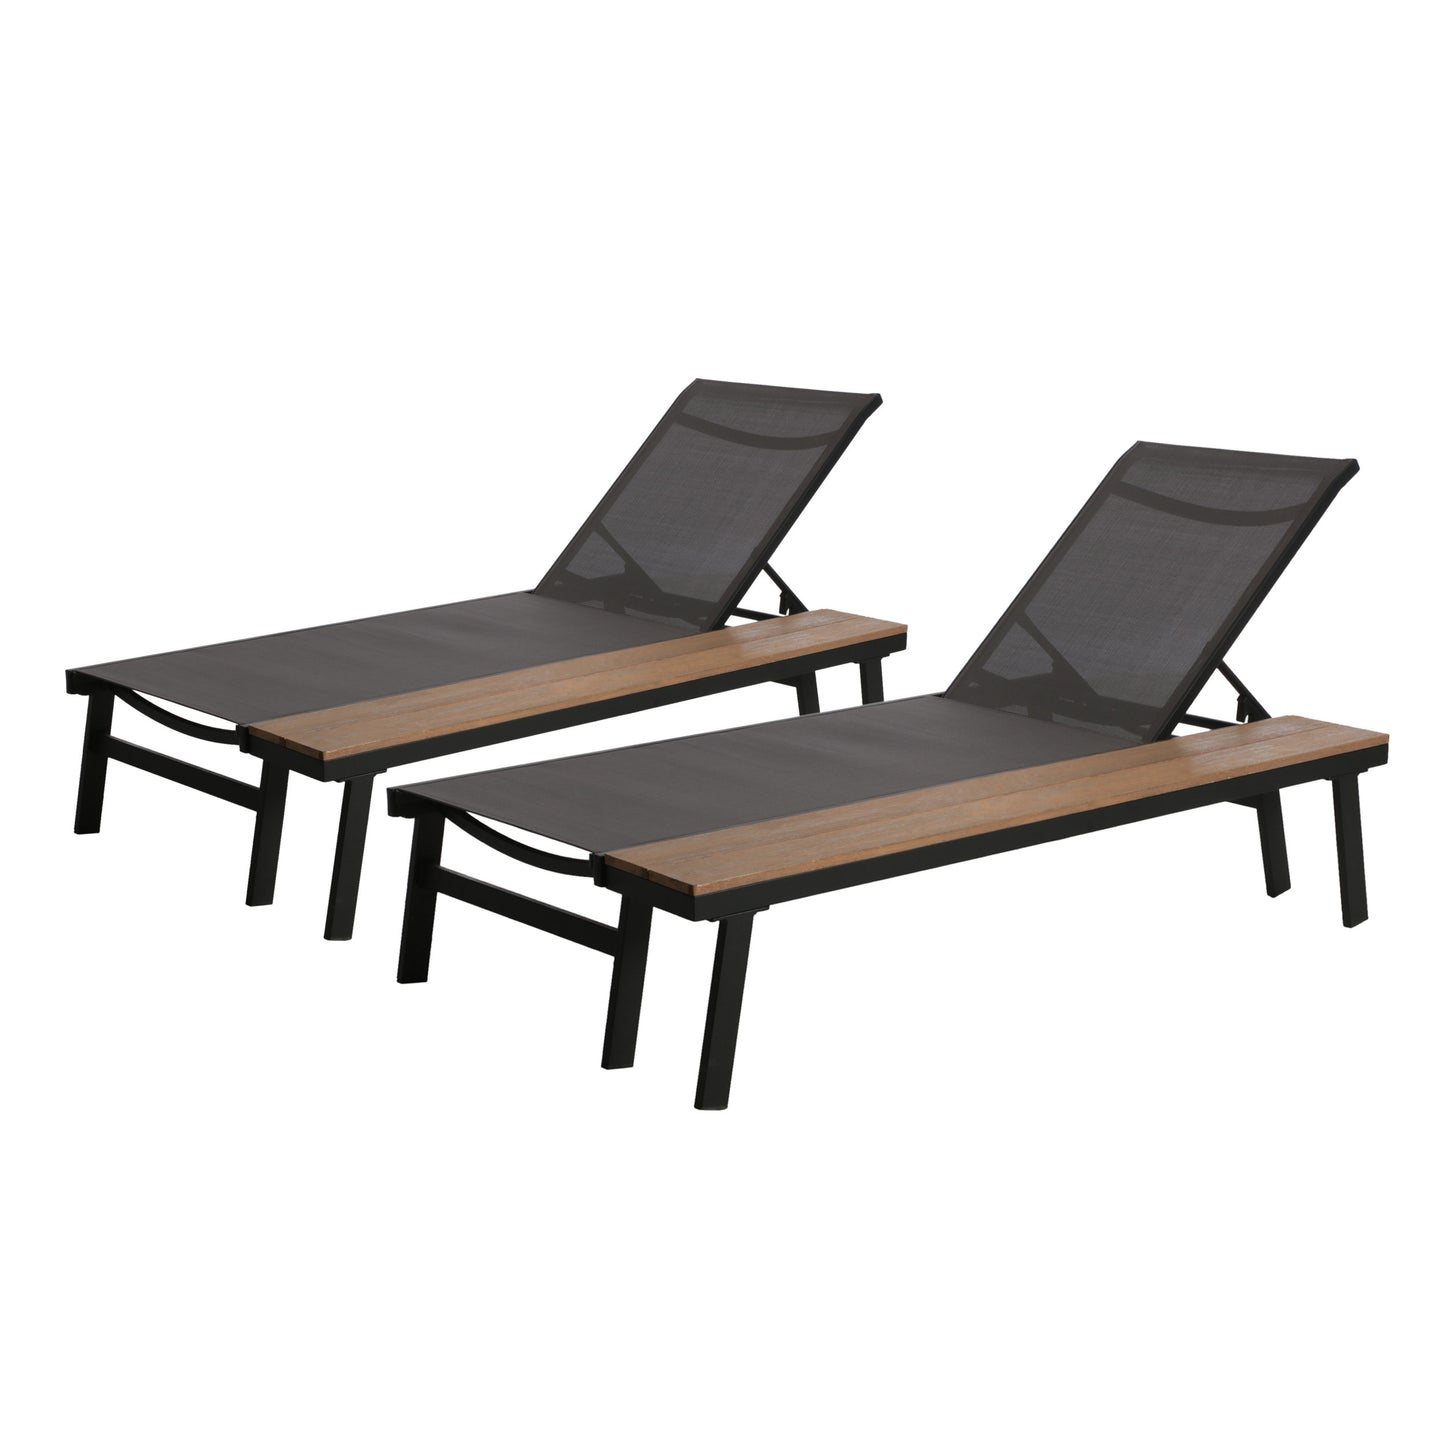 John Outdoor Mesh and Aluminum Chaise Lounge with Side Table